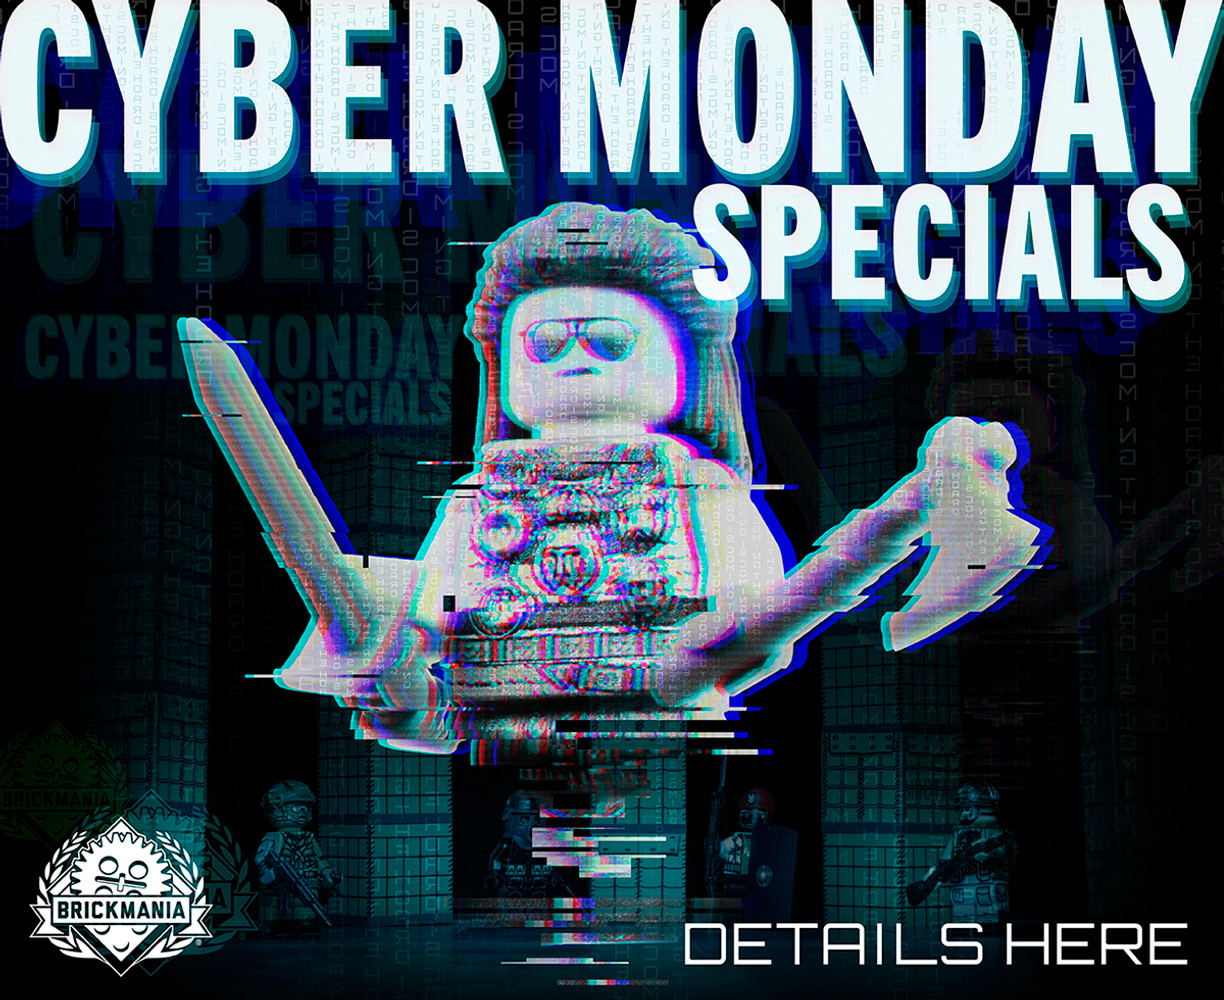 Cyber Monday Specials 2021